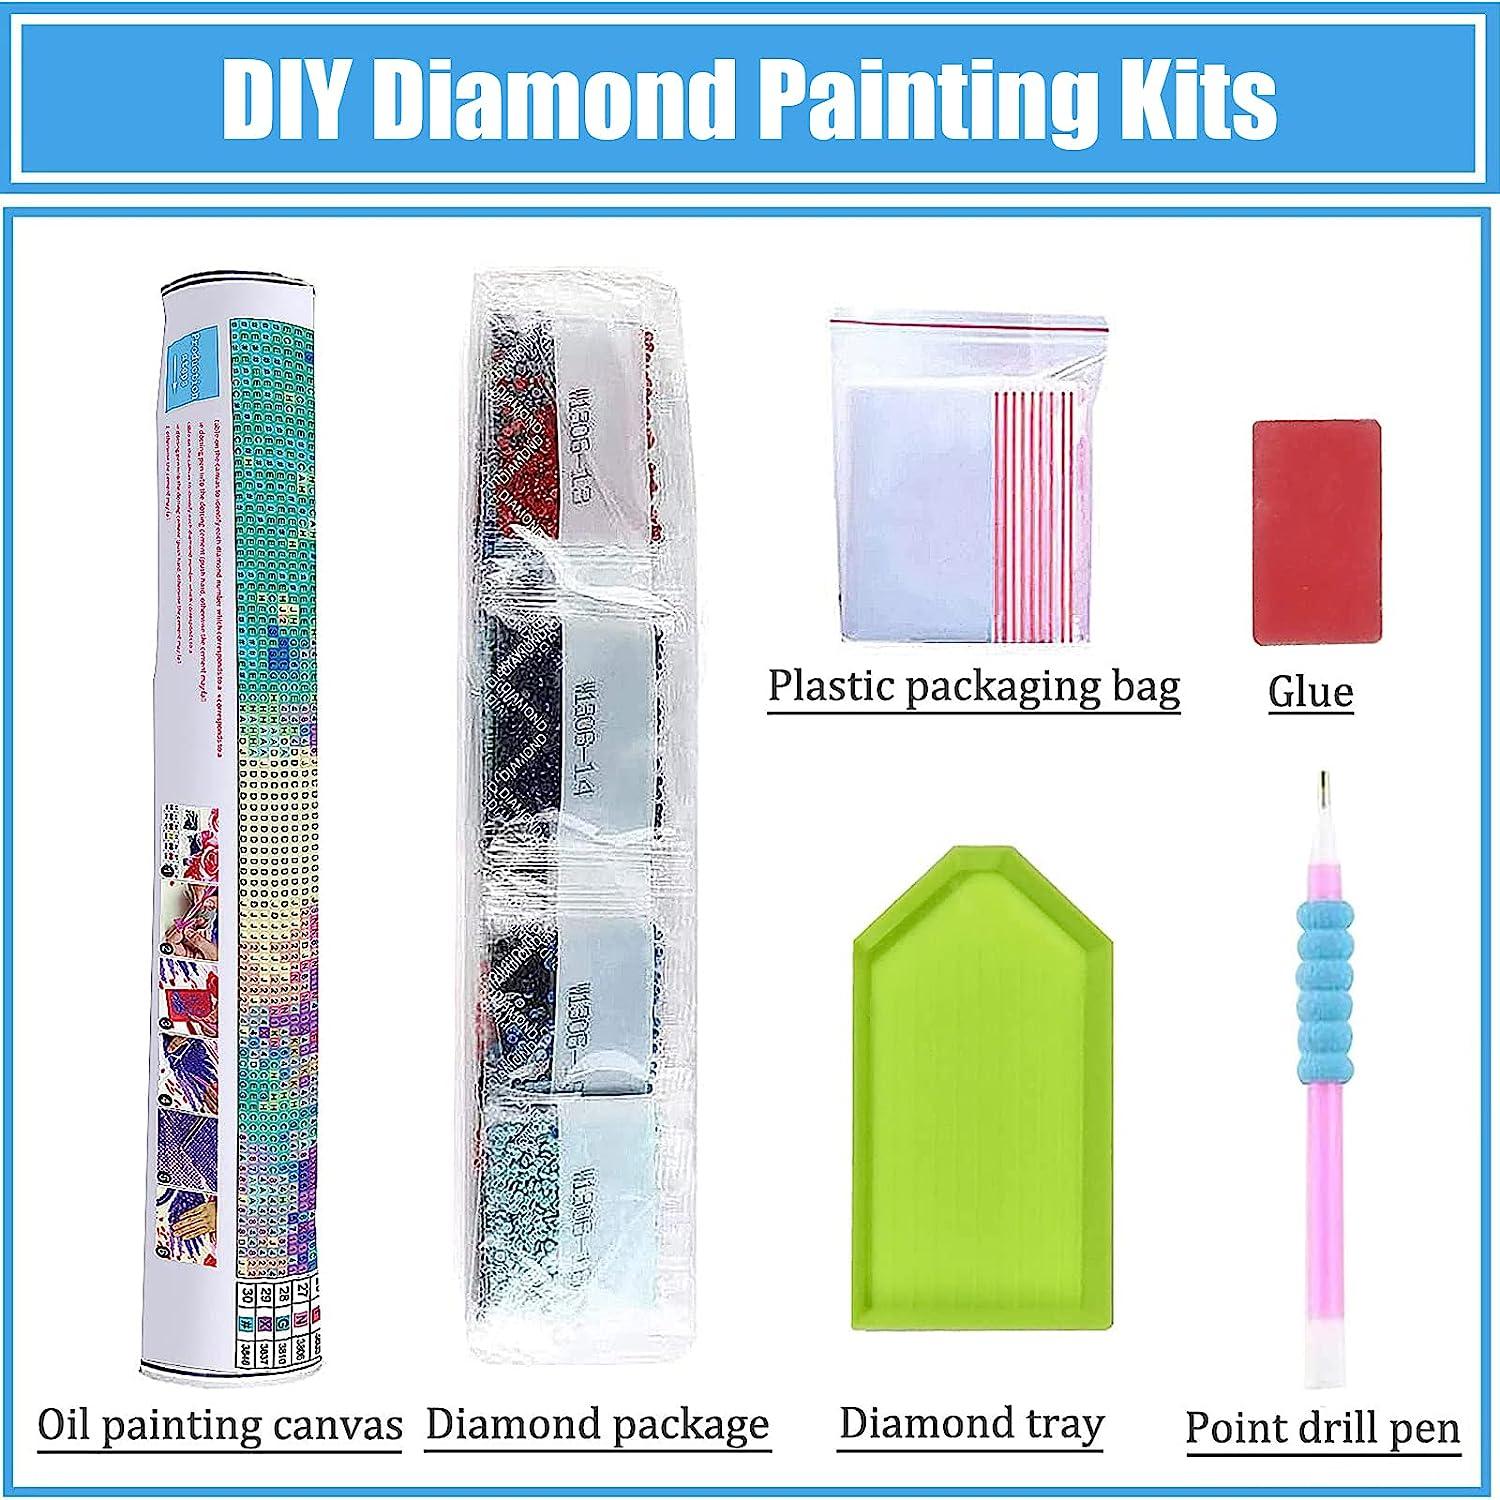 MOOMOH 5D Diamond Painting Kits for Adults - Let That Shit Go Diamond Art  Kits for Adults Kids Beginner DIY Buddha Full Drill Paintings with Diamonds  Gem Art for Home Wall Decor